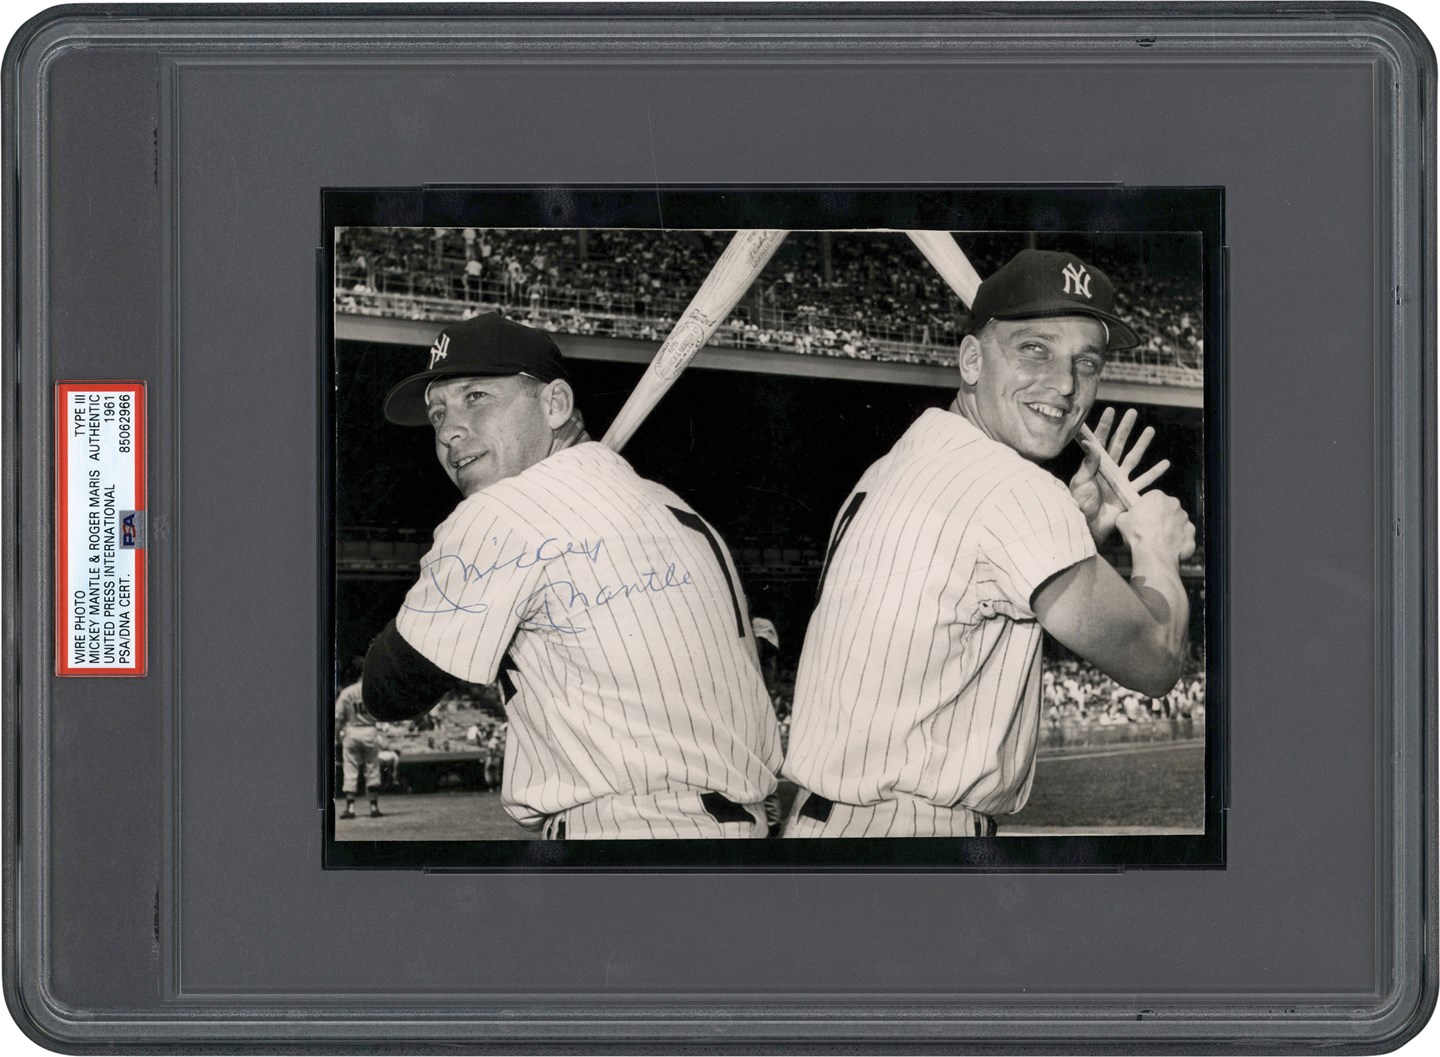 - 1961 Mickey Mantle & Roger Maris Original Photograph - Signed by Mantle (PSA)